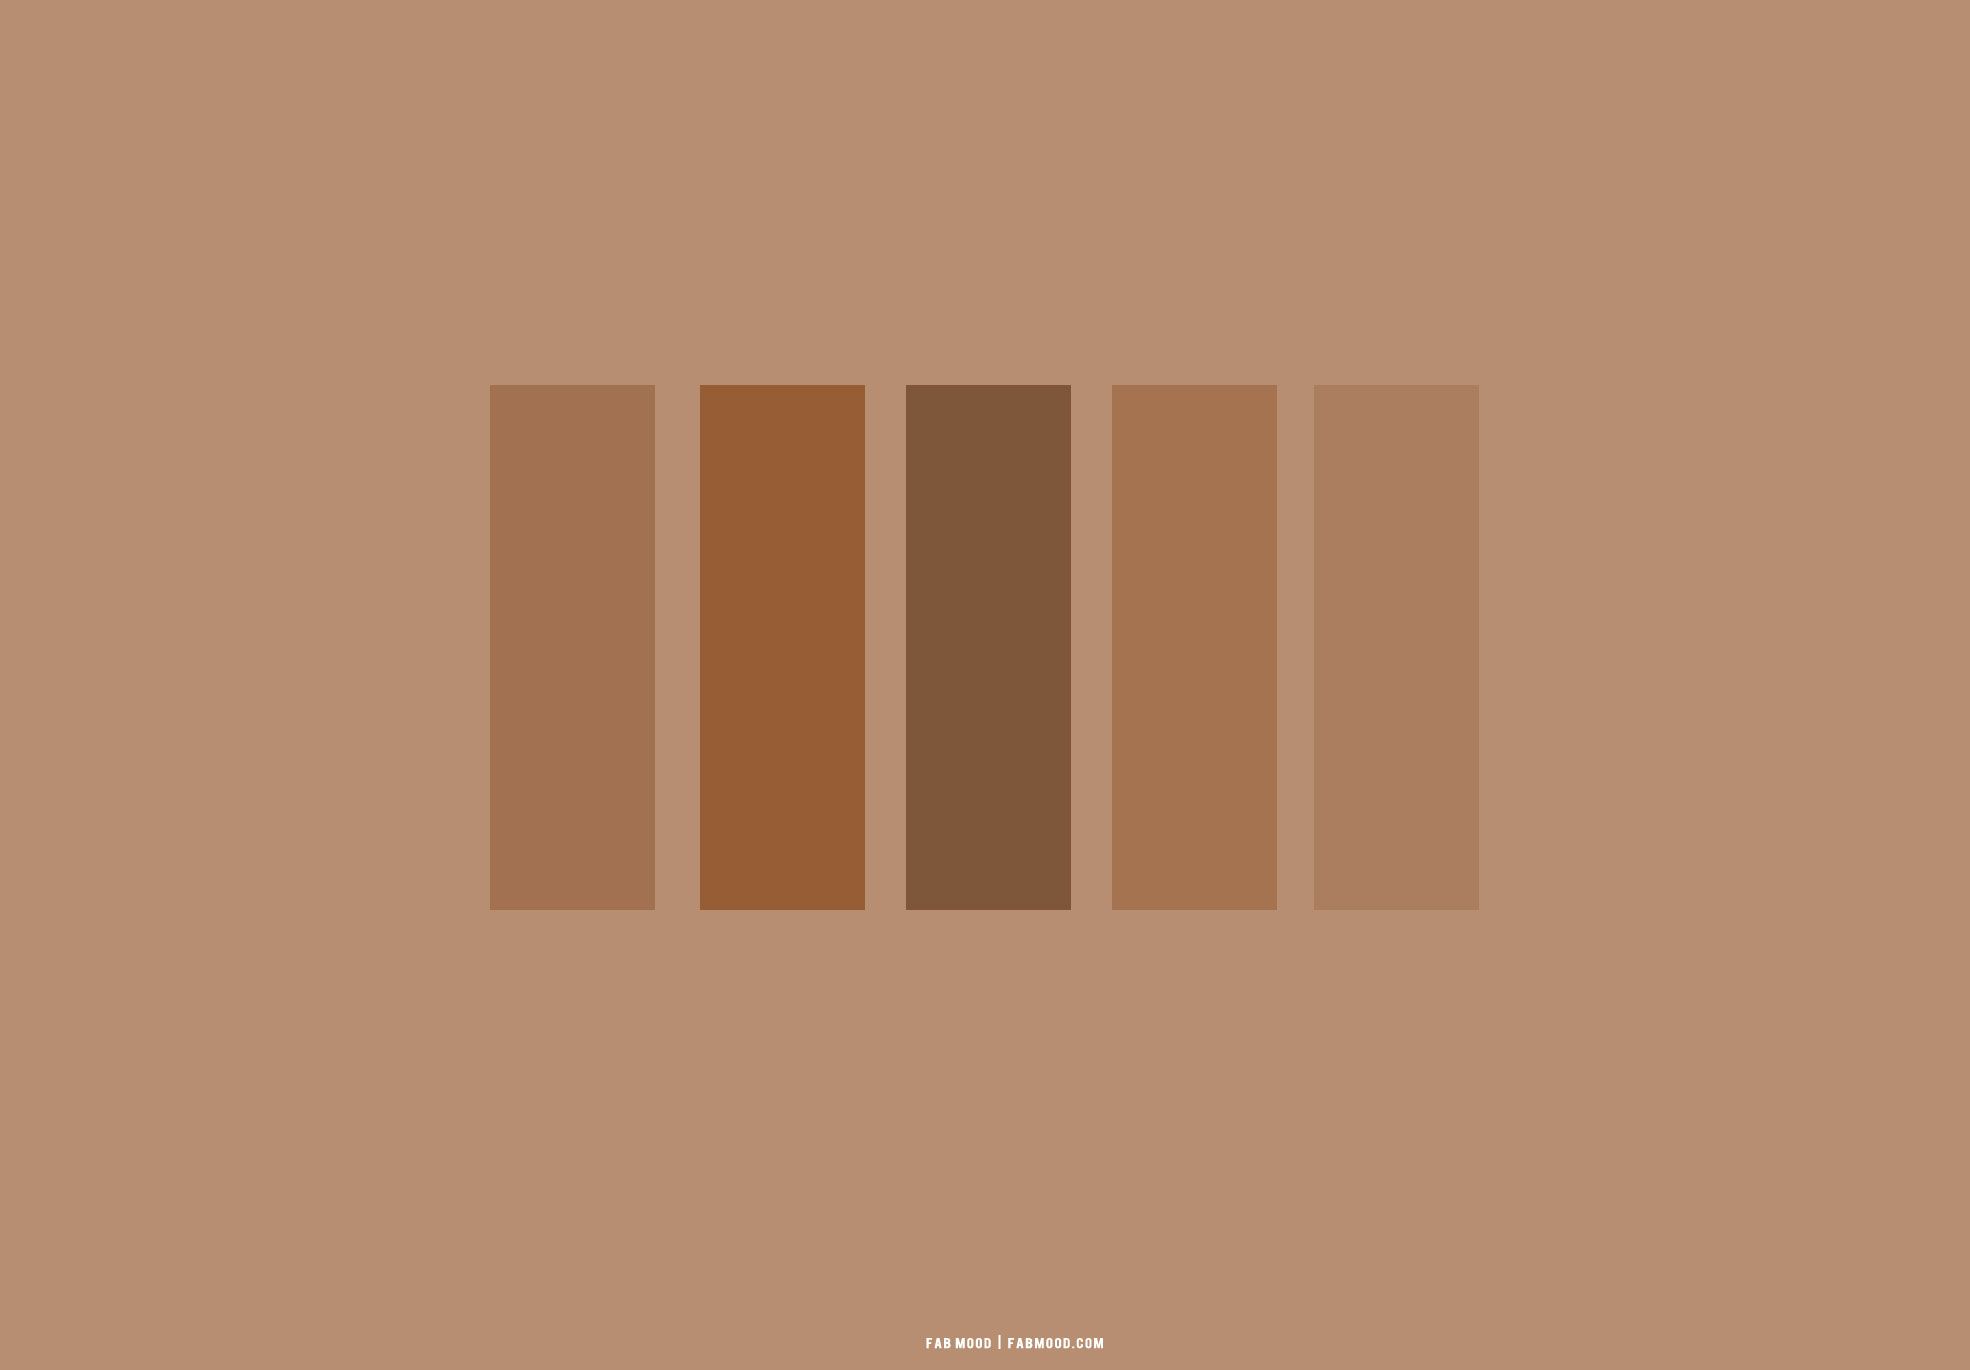 The color palette of a brown background - Brown, light brown